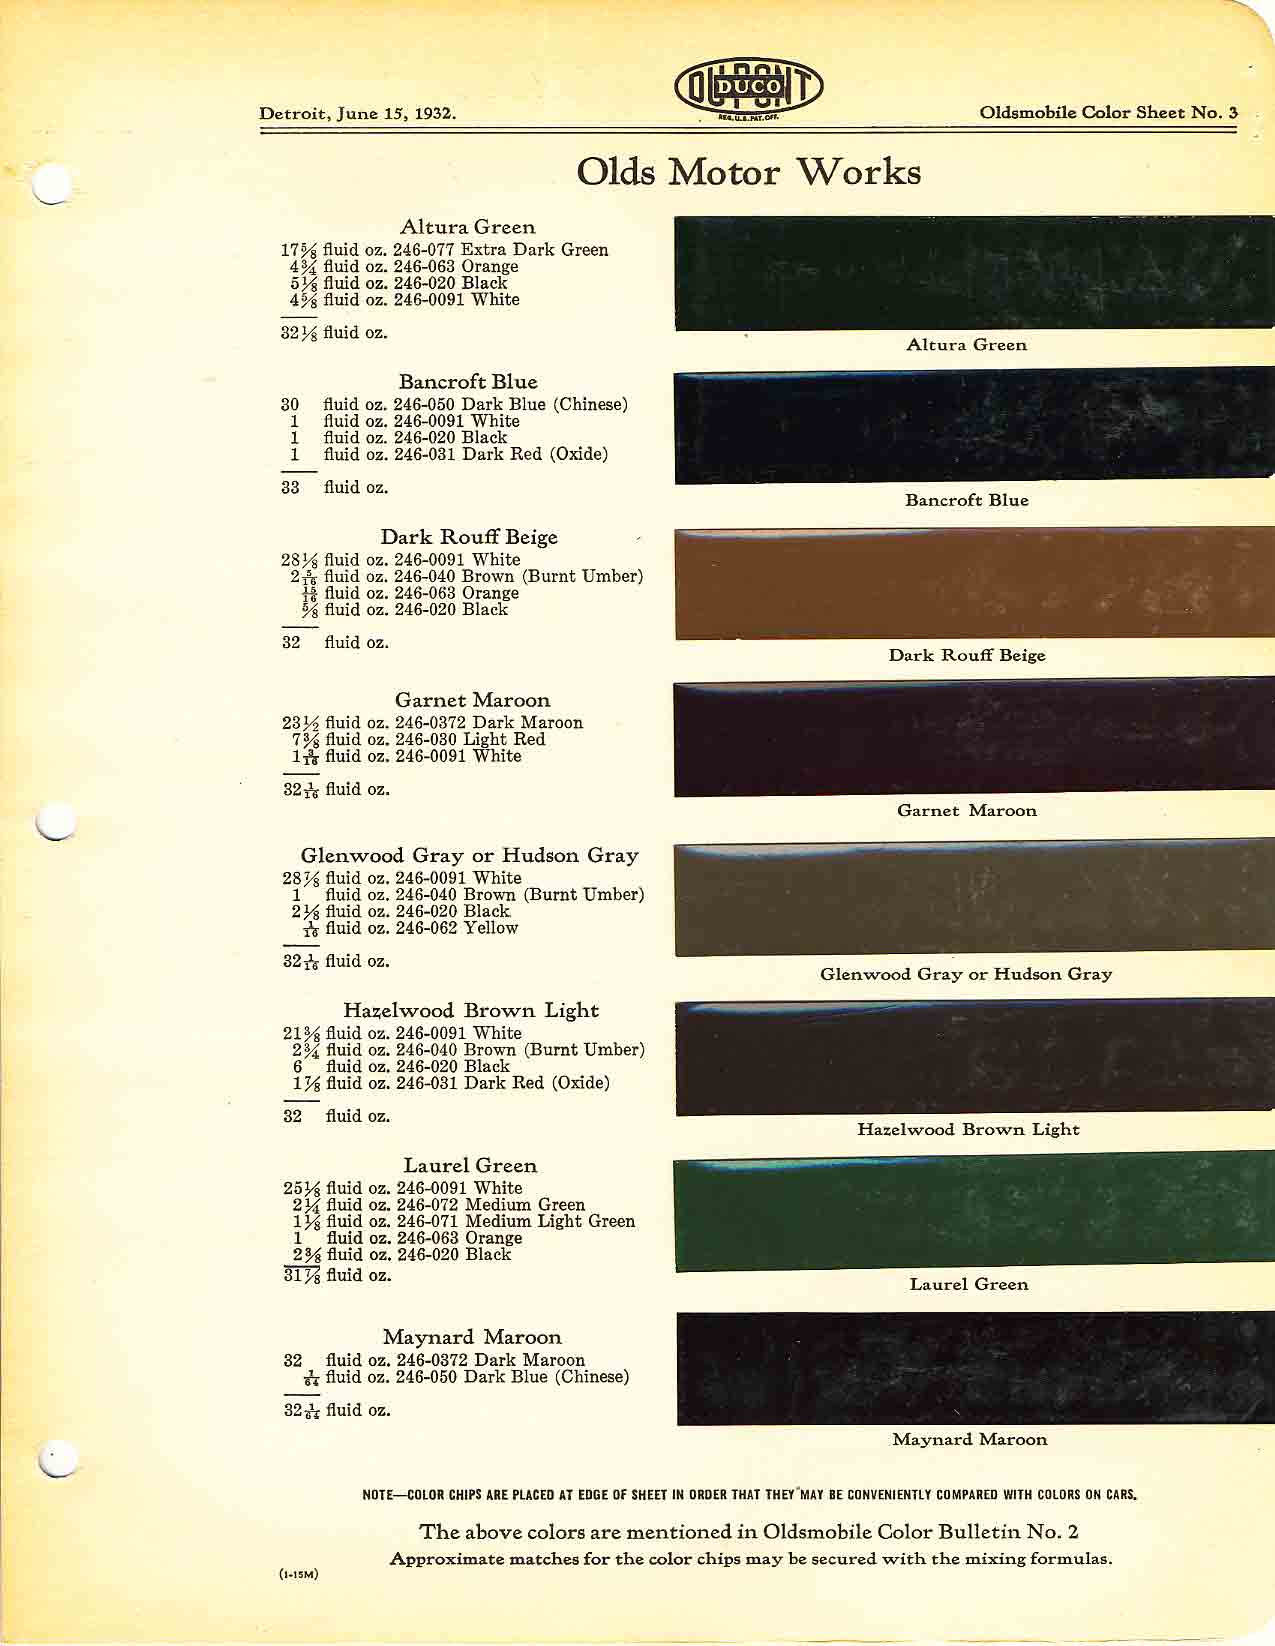 Colors and codes used on Oldsmobile Vehicles in 1932